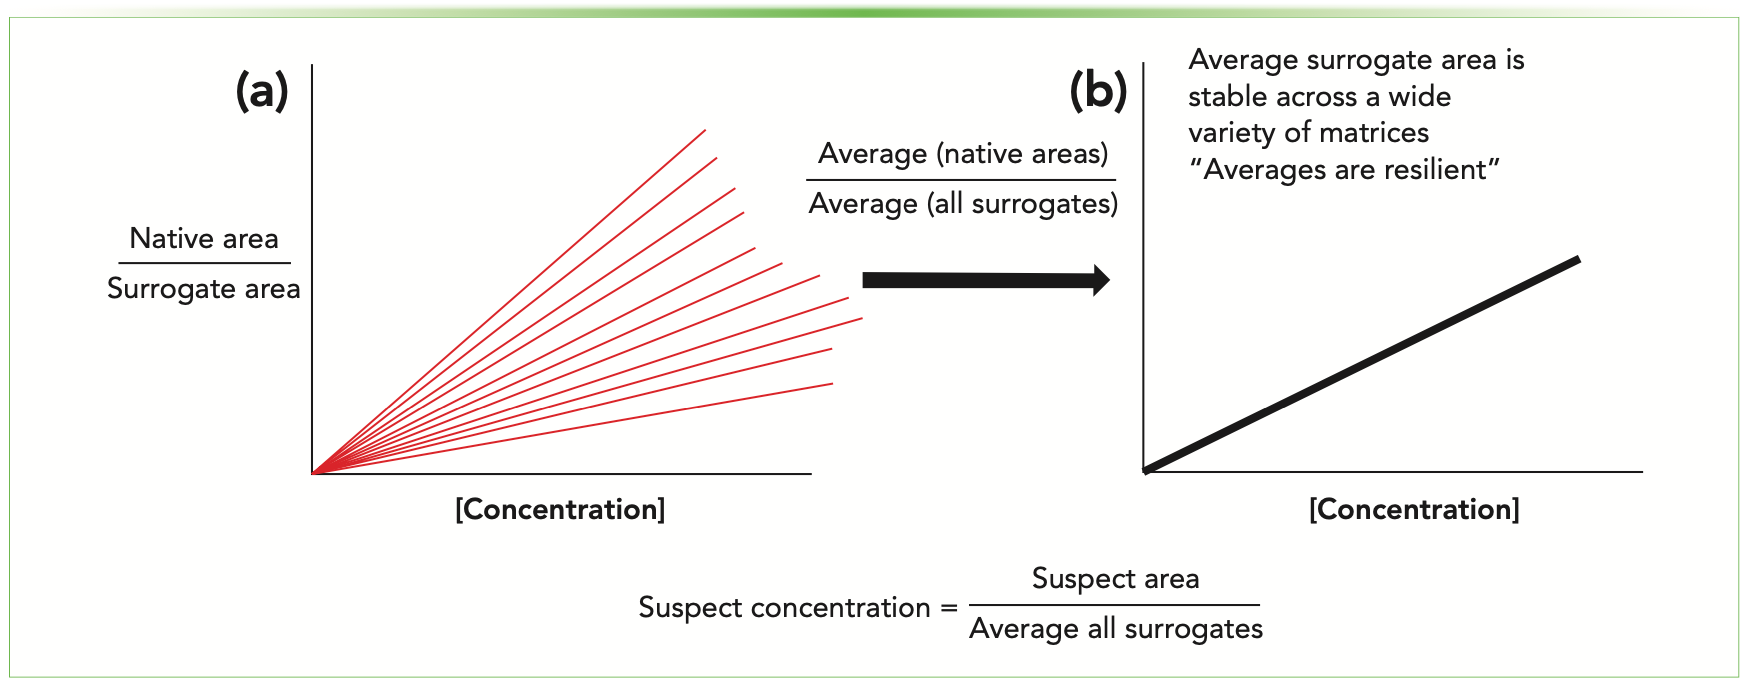 FIGURE 1: Graphic depicting (a) multiple calibration curves and (b) the single PFAS curve for estimating suspect concentrations. One-to-one matching involved estimating which calibration curve would most closely mimic the suspect PFAS. (b) The new technique uses one curve for all suspect PFAS, and would unify semi-quantitative techniques across studies and laboratories.